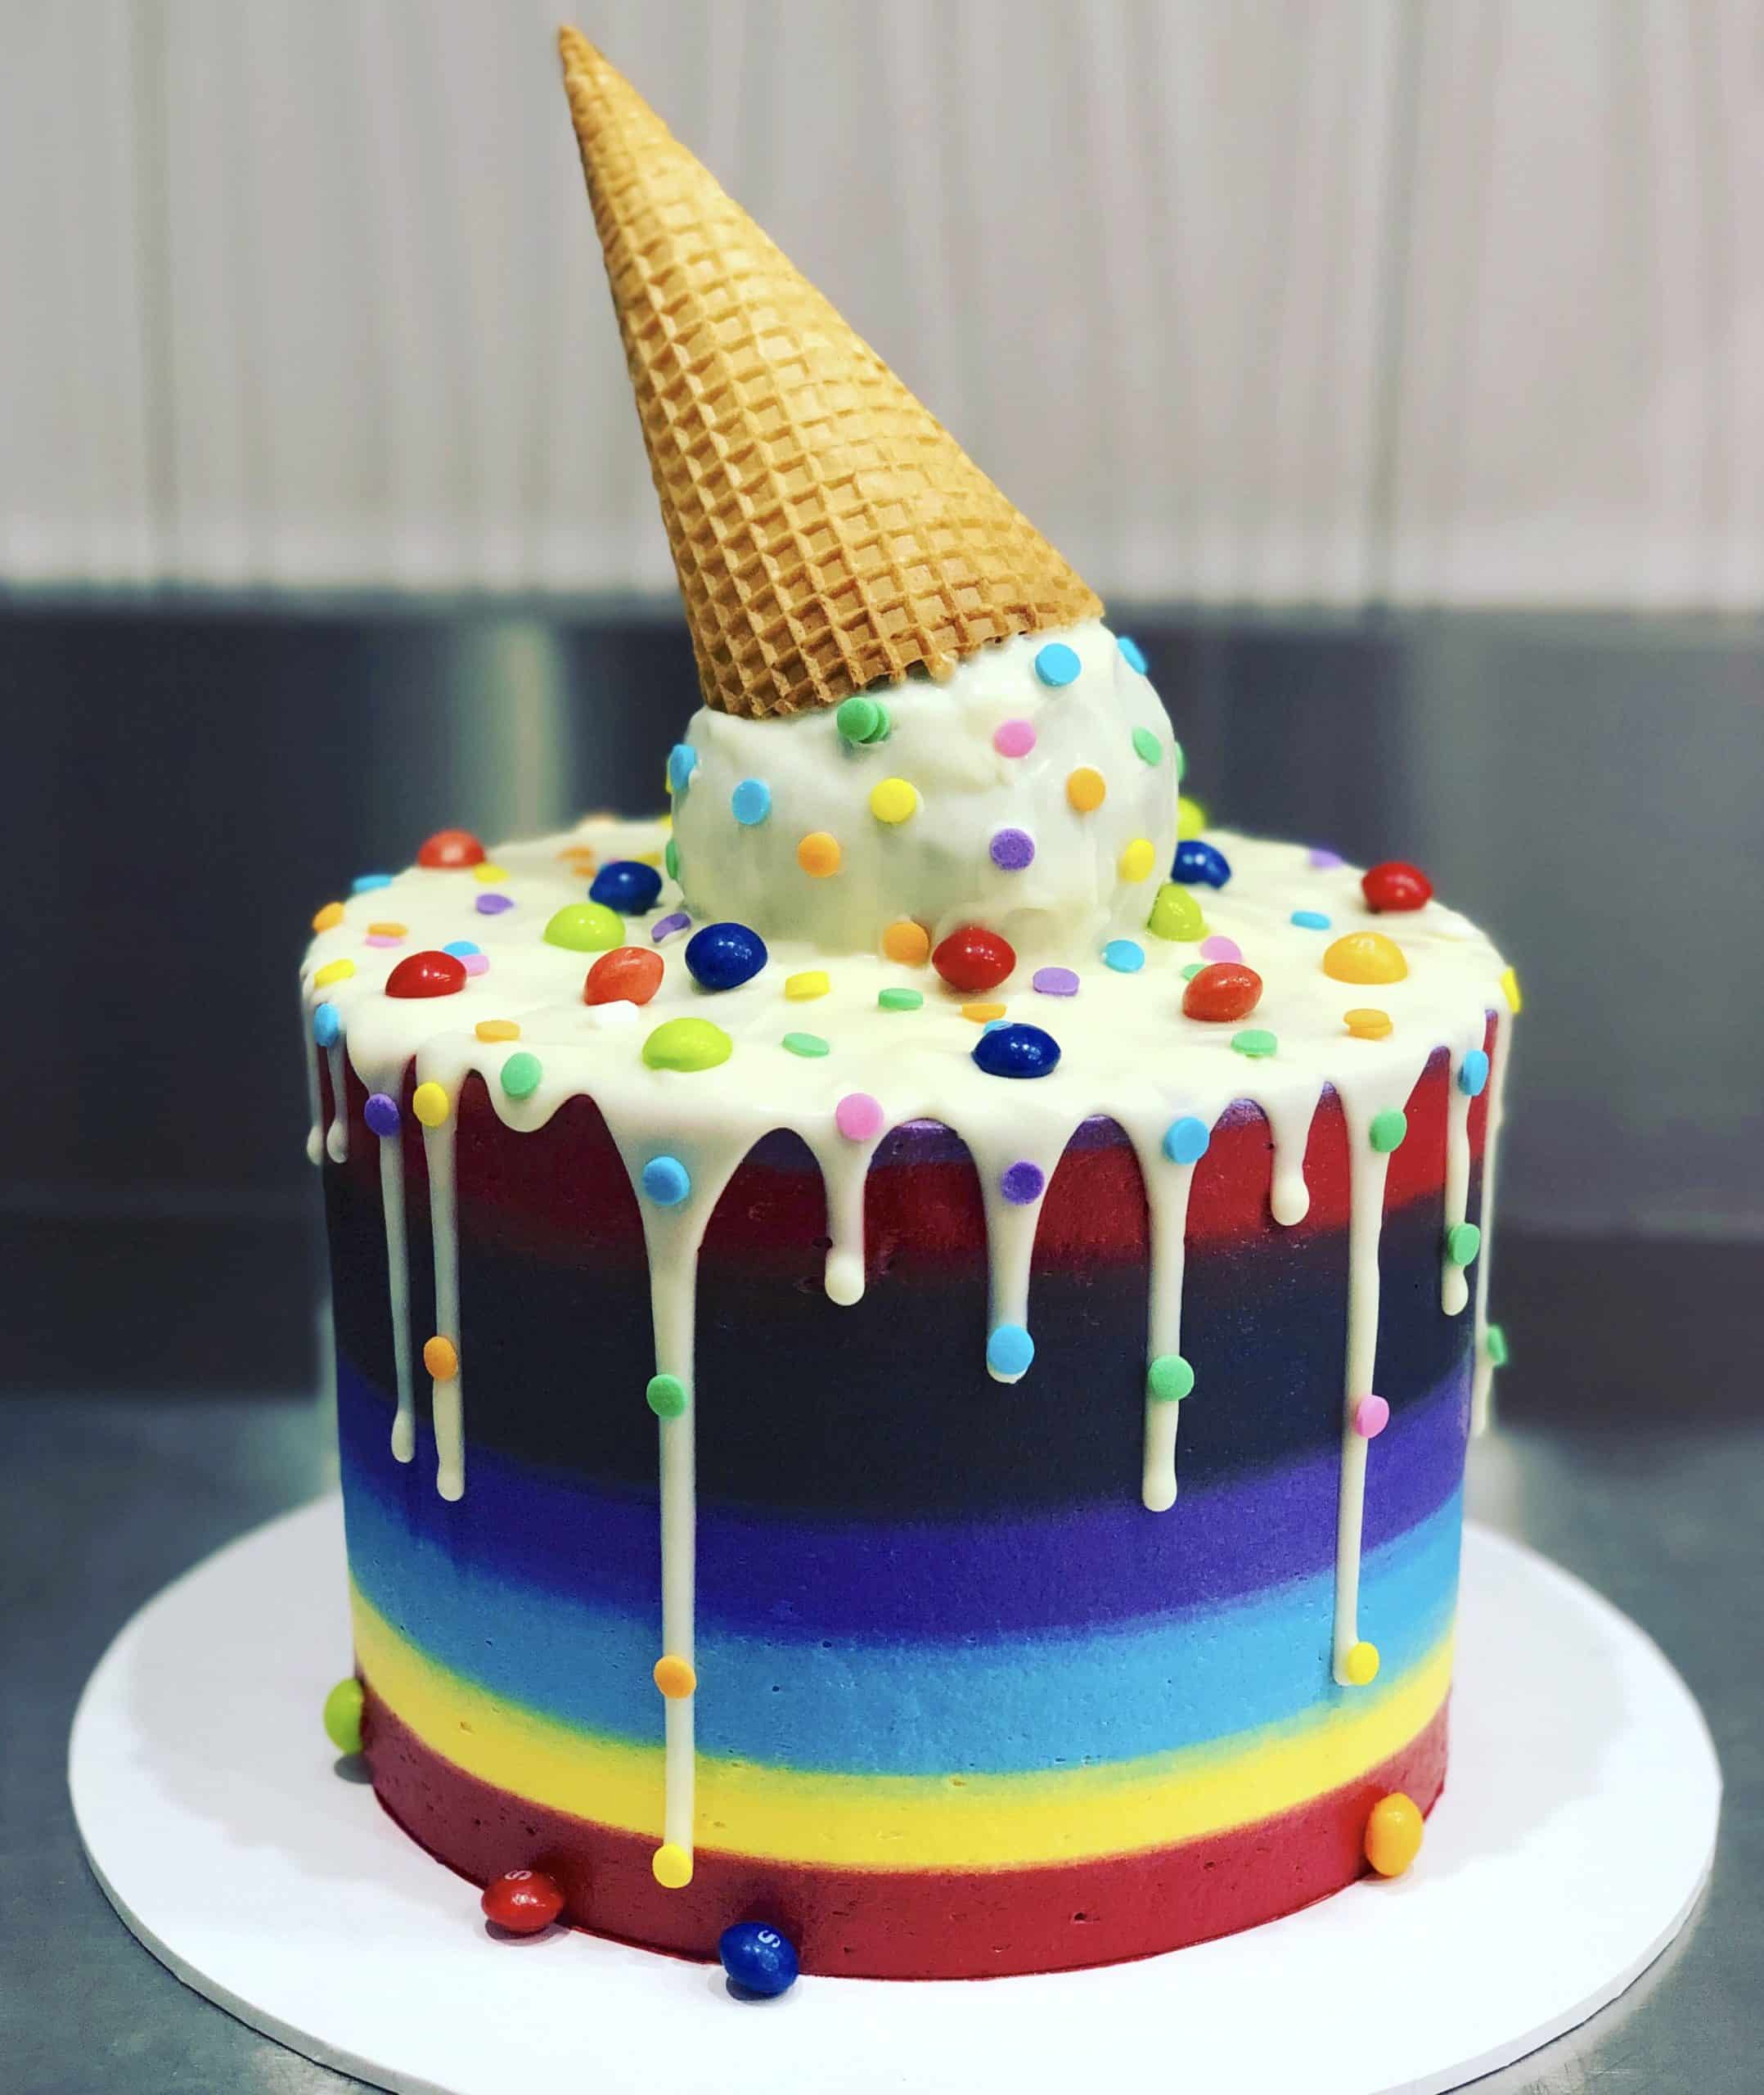 Rainbow Buttercream Cake by Sugar Whipped Cakes